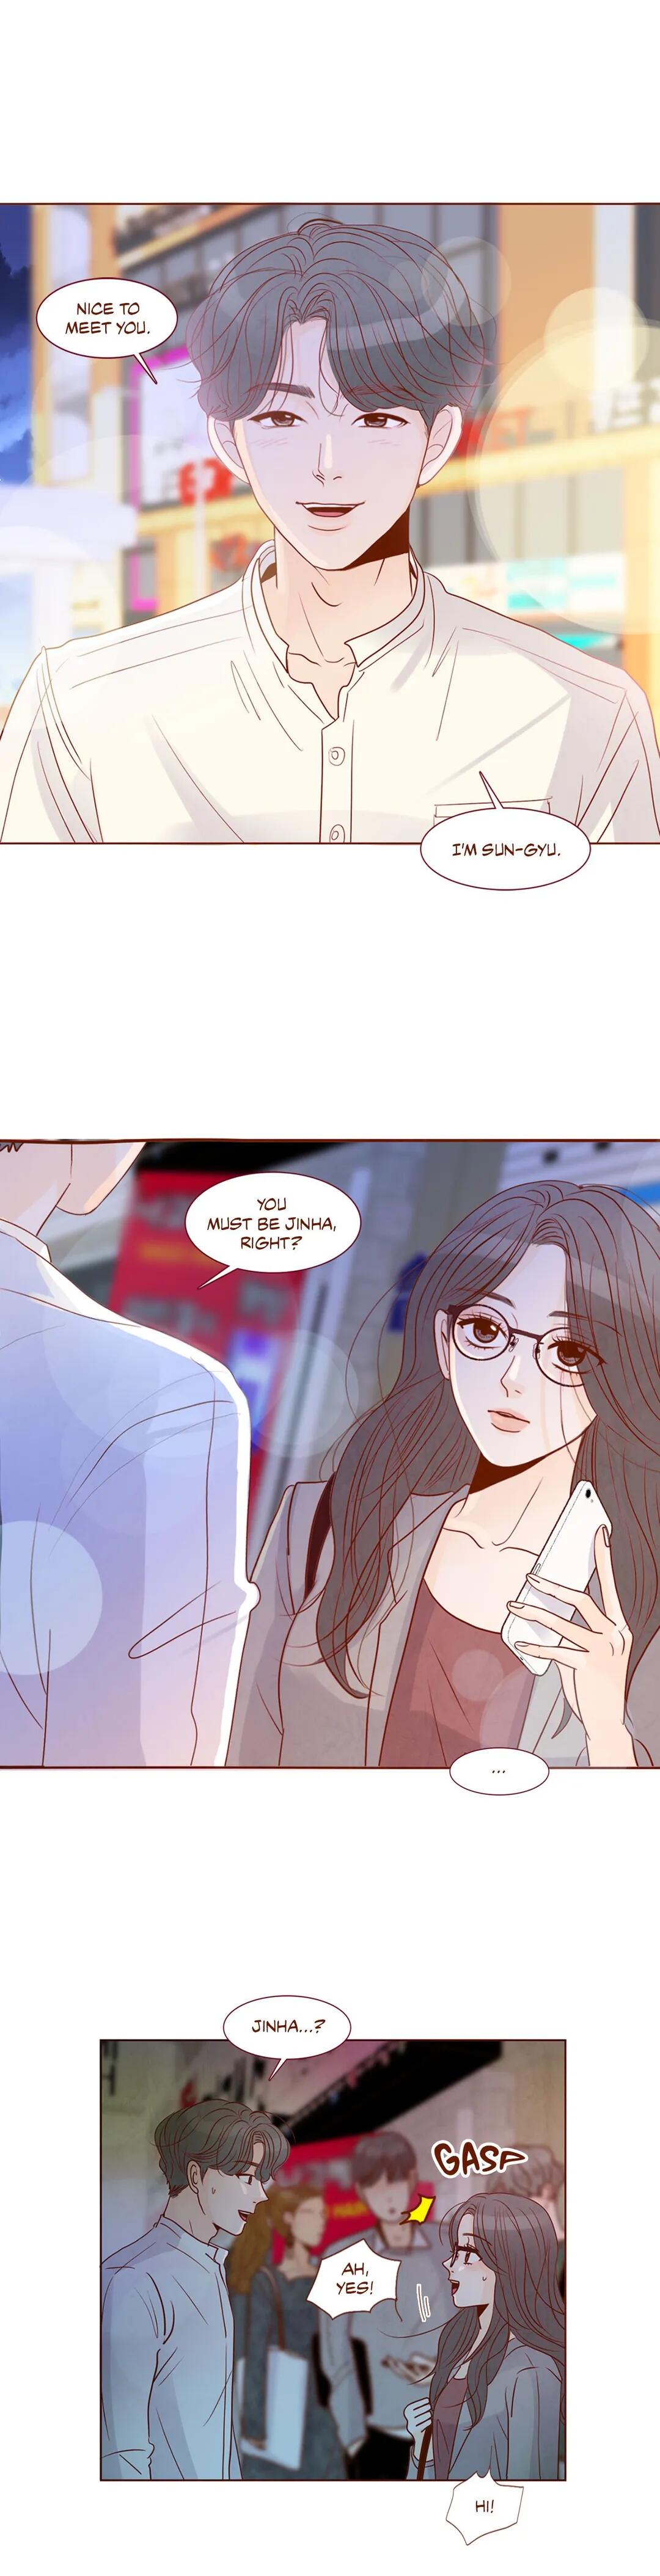 Secret Crush Chapter 99 - Side Story: The Blind Date - Picture 1